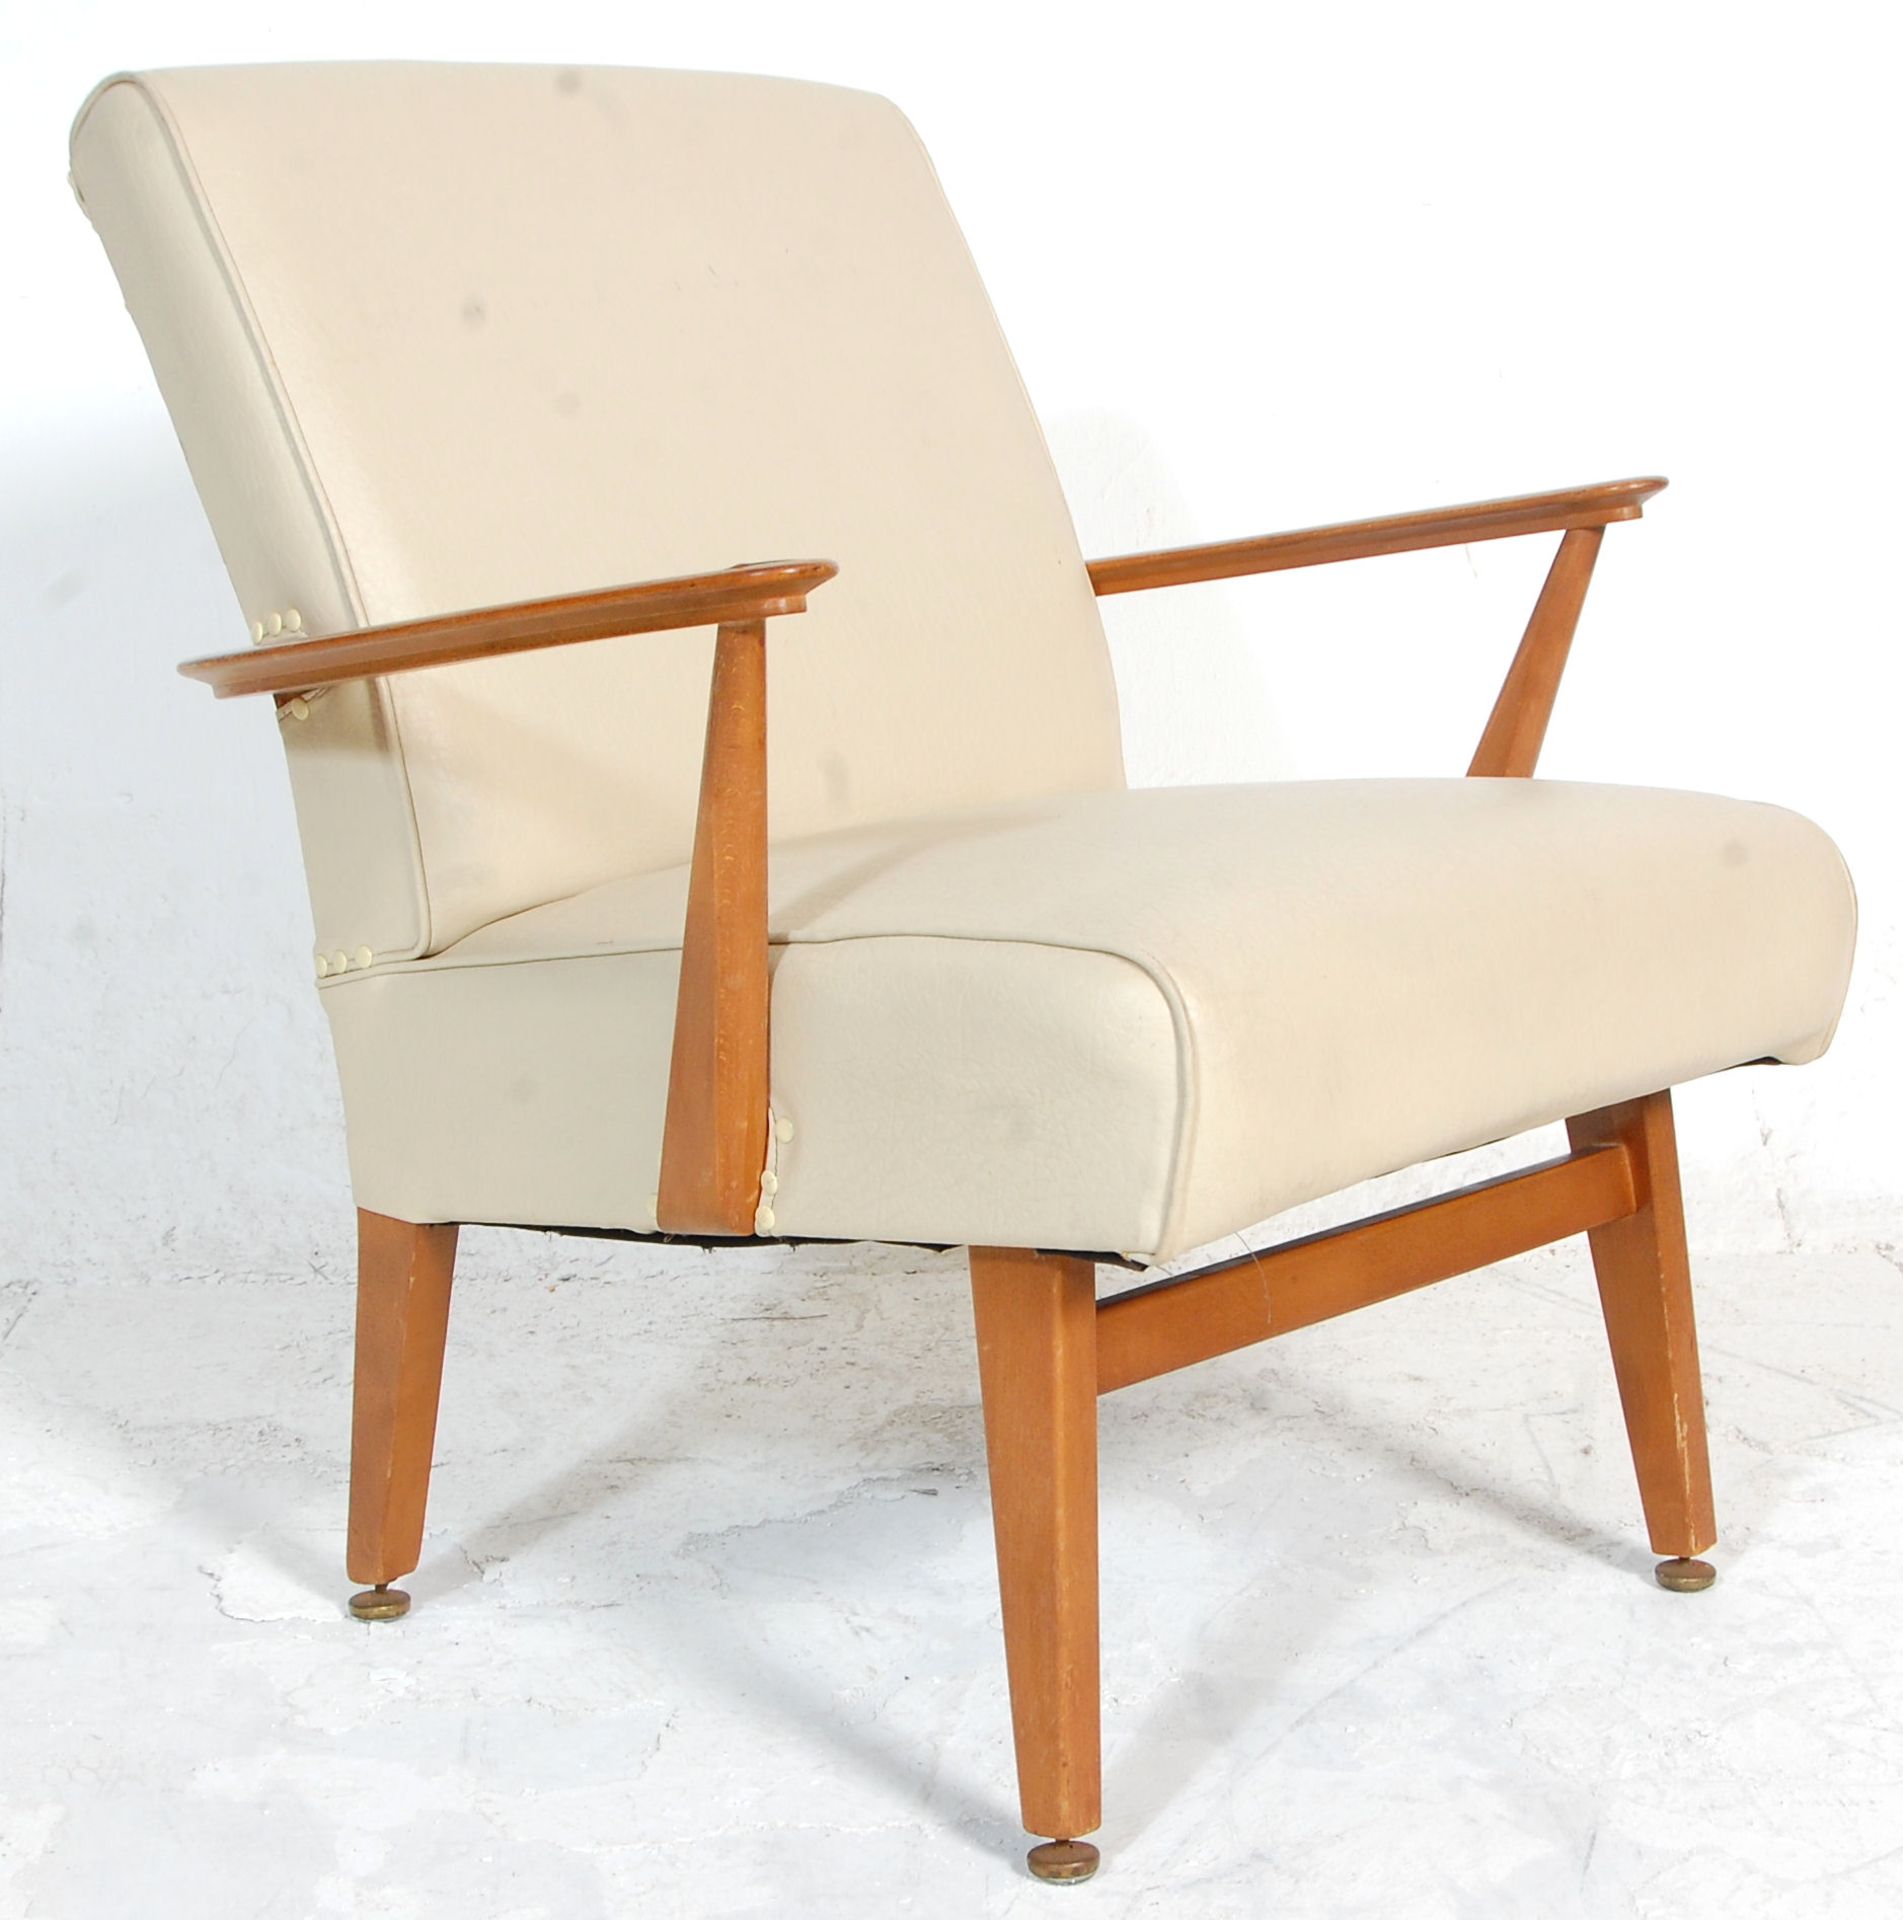 A good retro 20th Century teak framed armchair / chair having a white leather covered backrest and